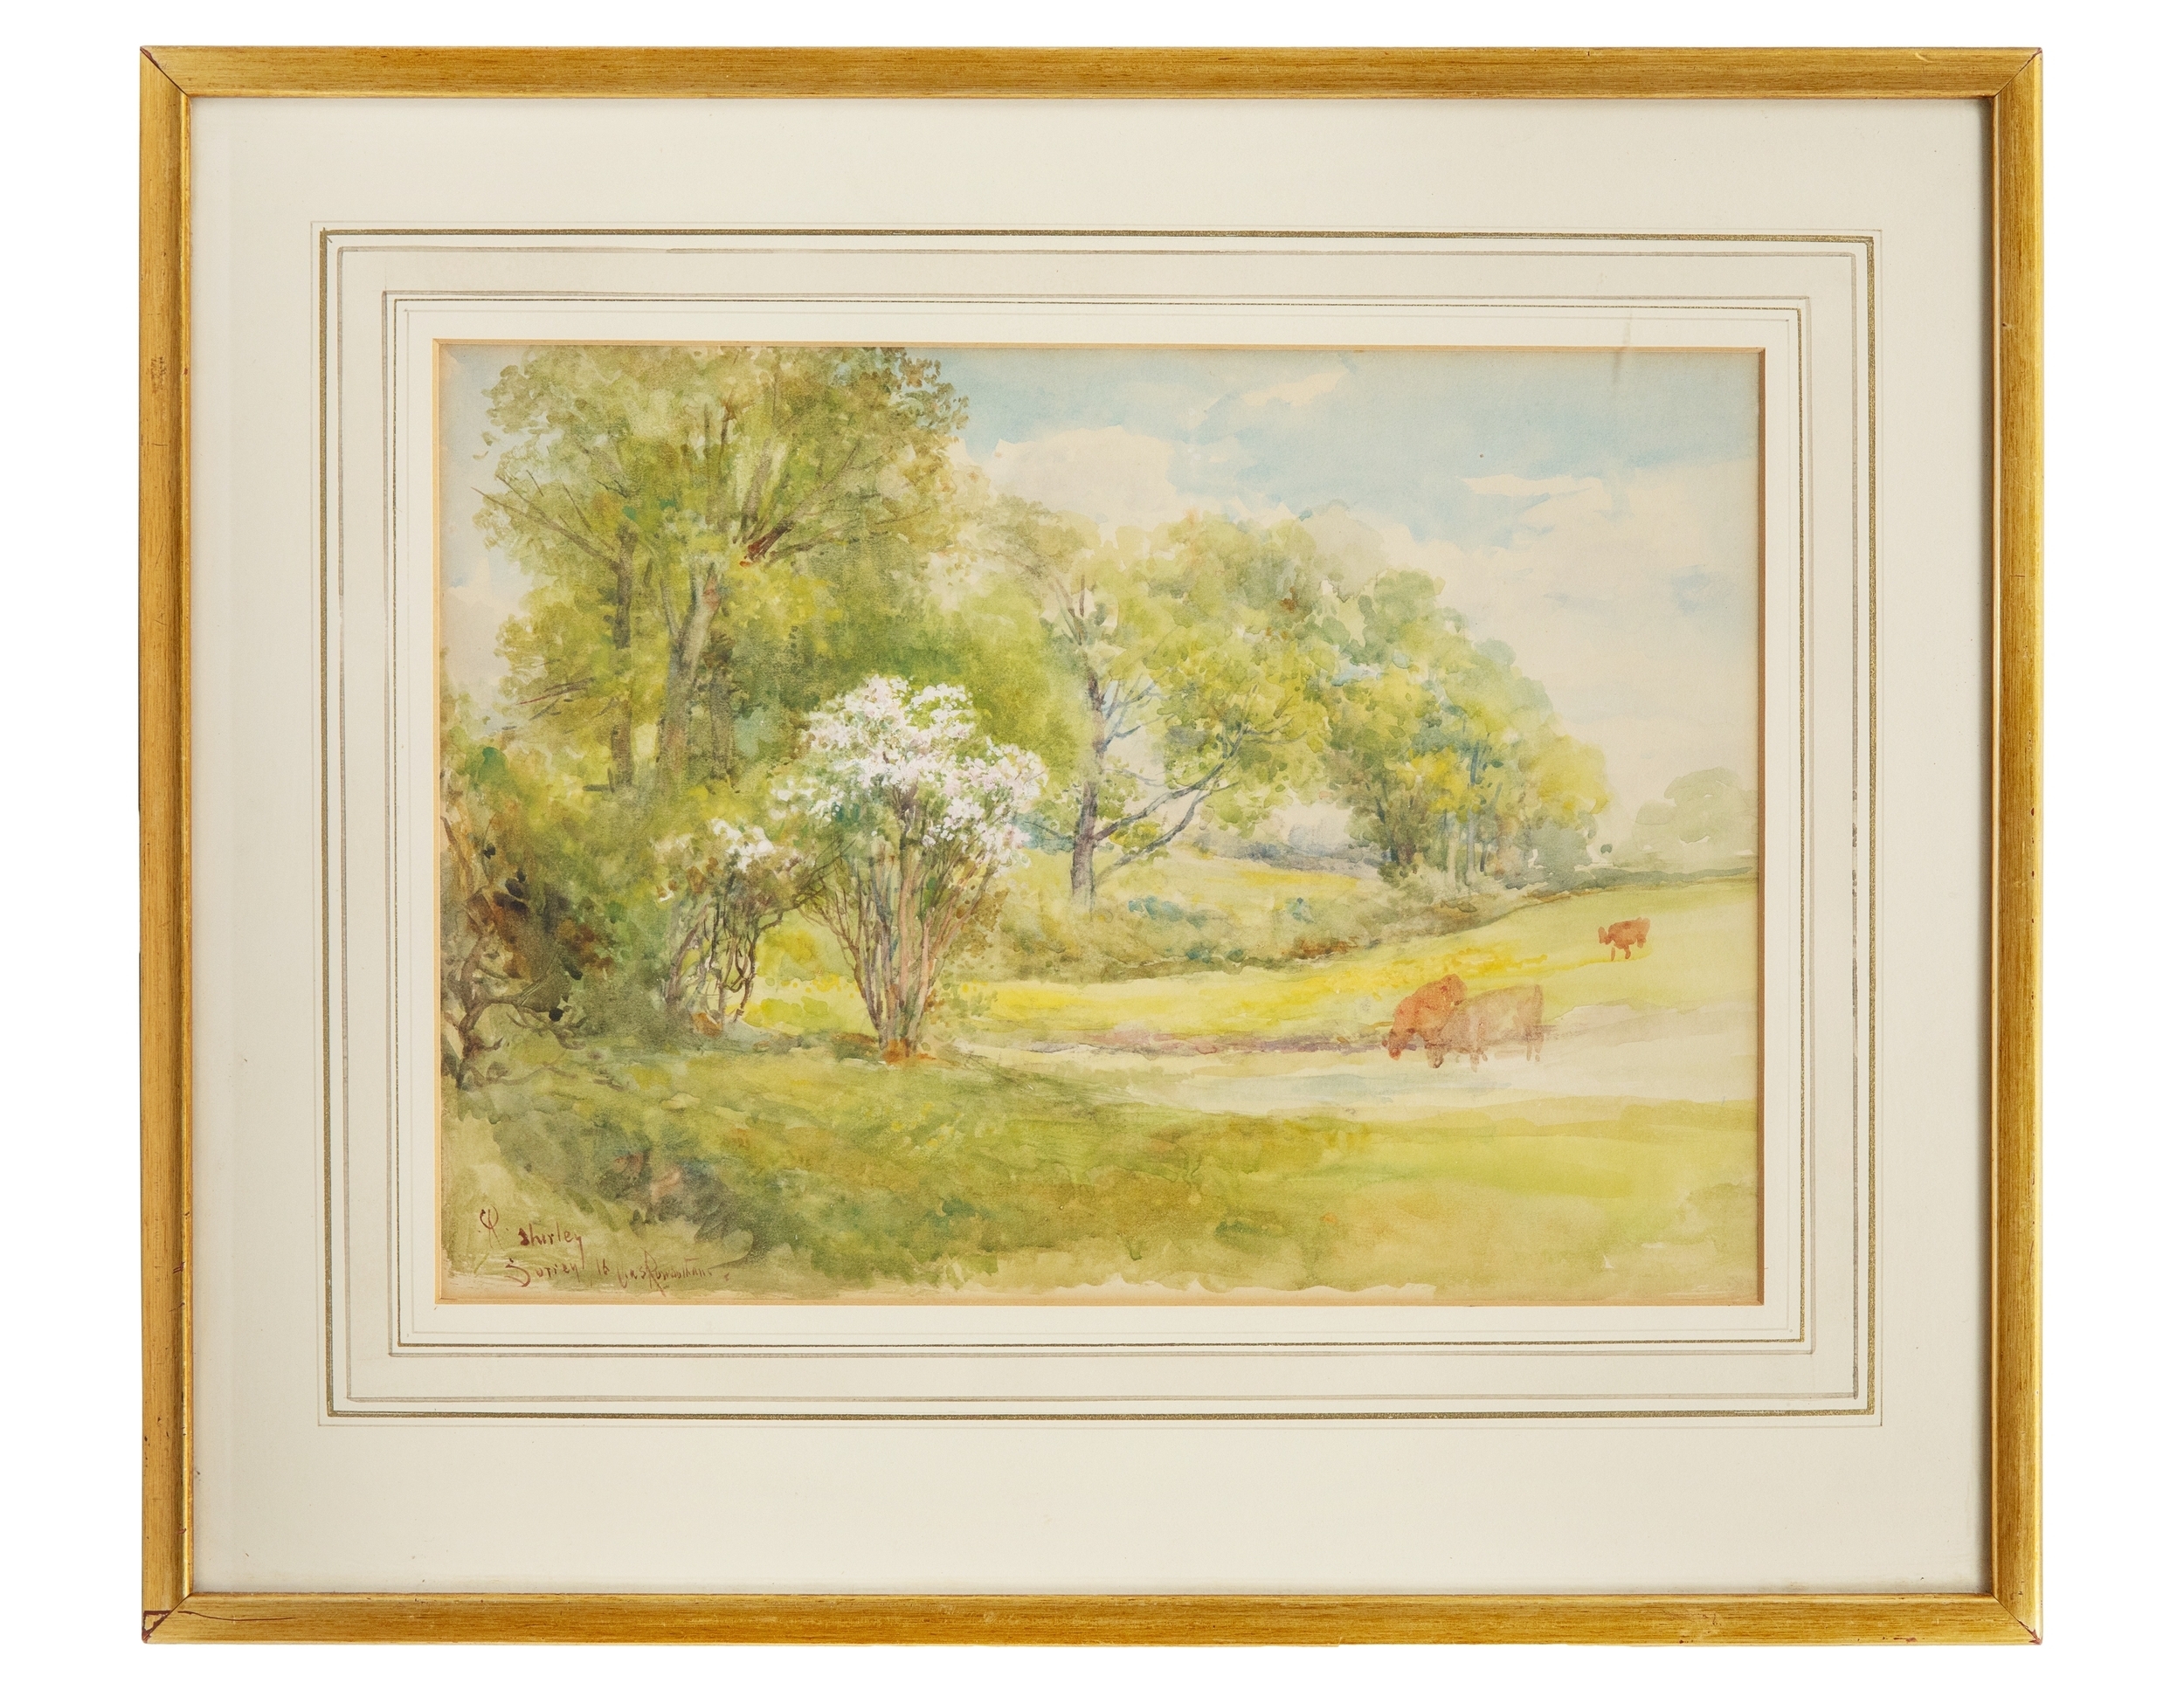 Artwork by Charles Edmund Rowbotham, Shirley, Surrey, Made of Watercolour on paper